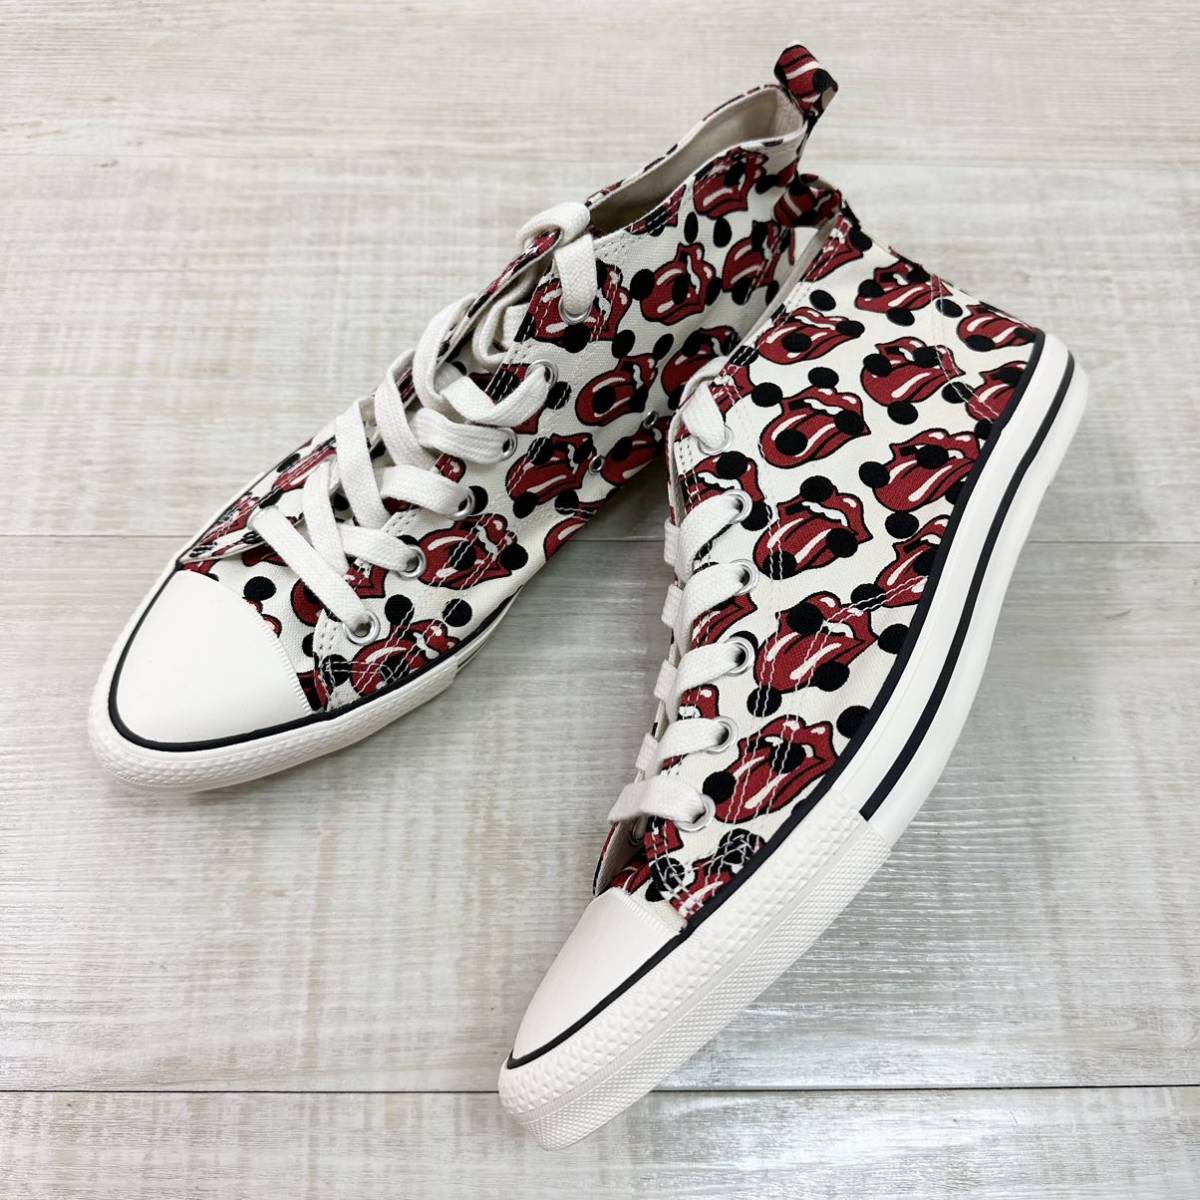 06ss 2006 デッドストック COMME des GARCONS HOMME PLUS × The Rolling Stones ギャルソン ローリングストーンズ 総柄 スニーカー 26cm_画像1